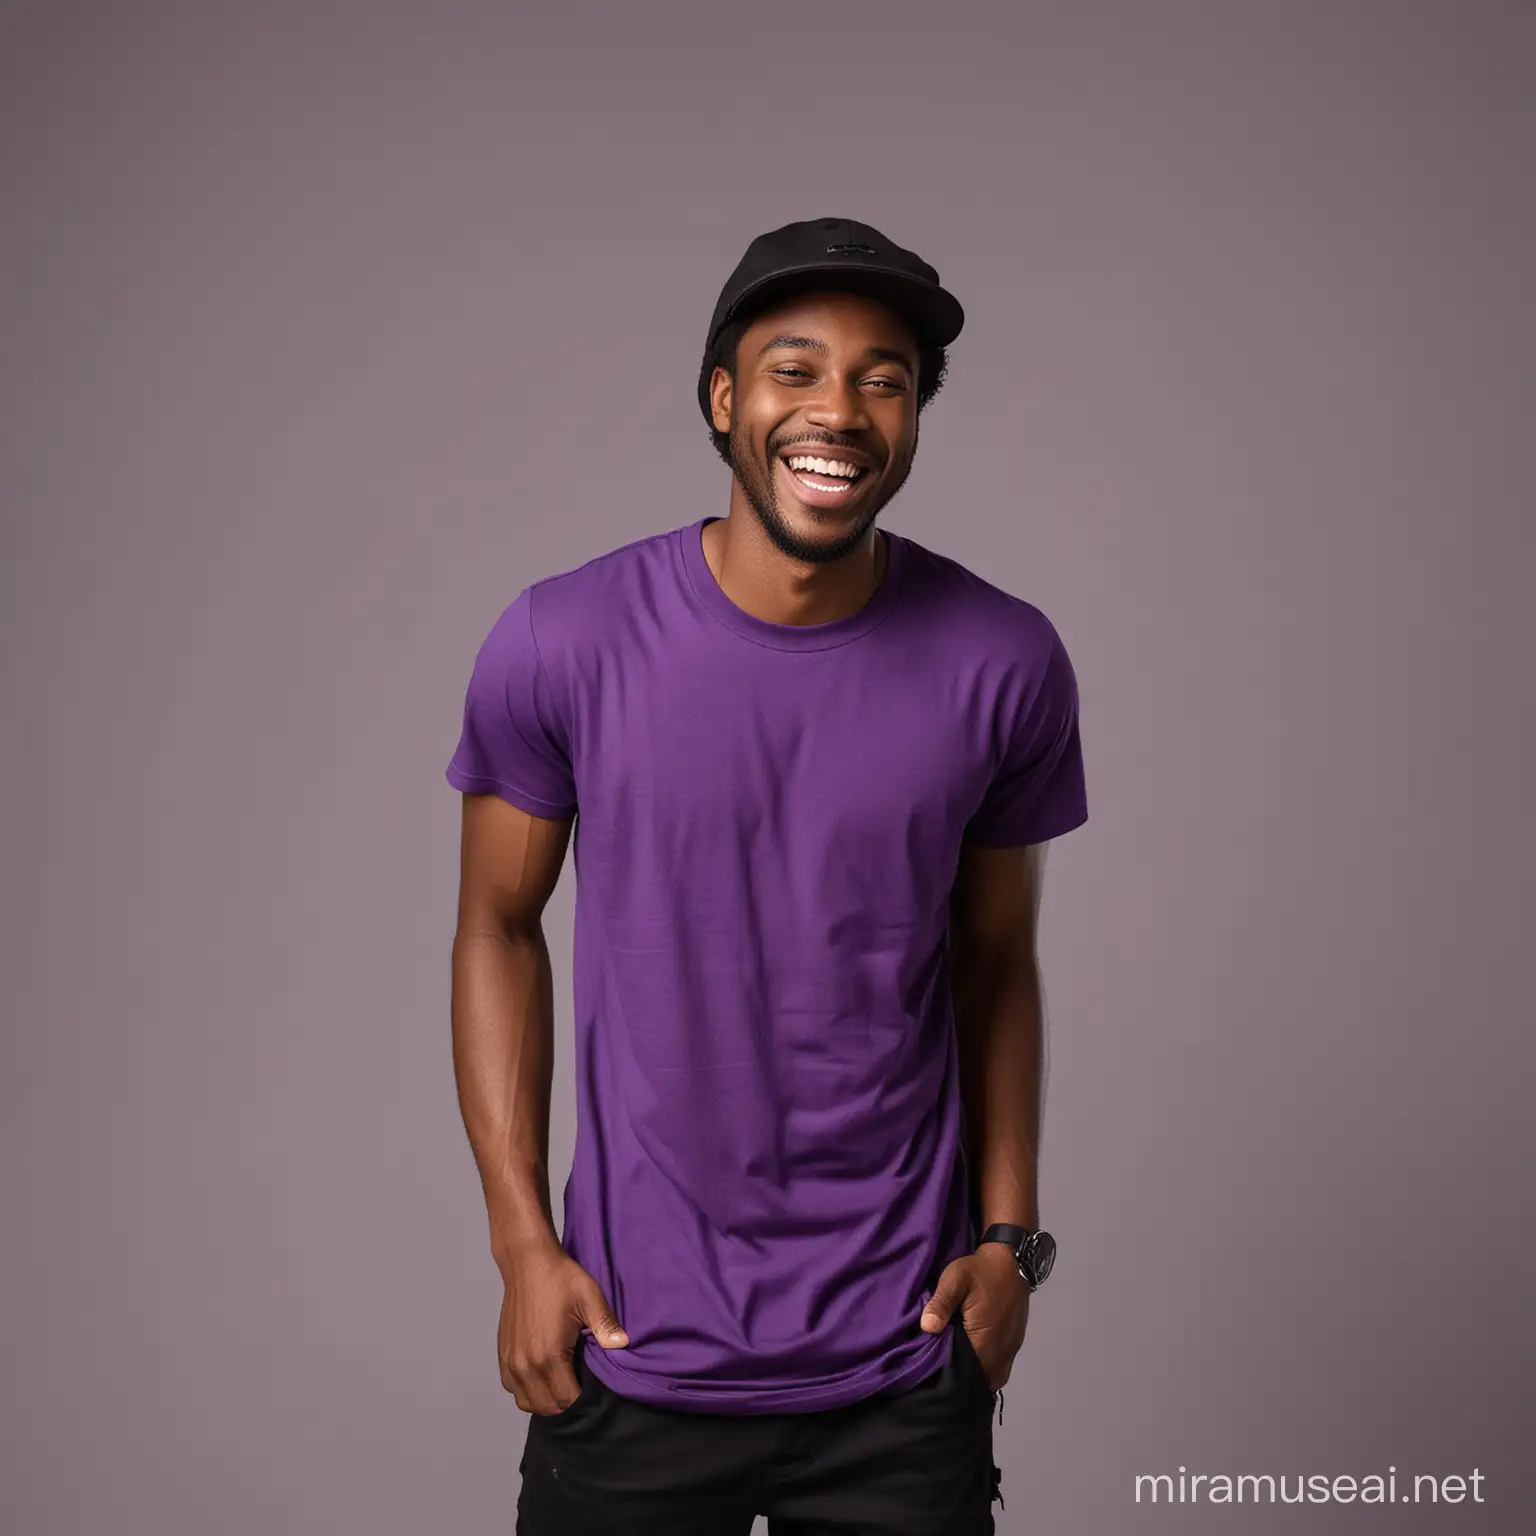 Cheerful African American Man Laughing in Stylish Midnight Purple Outfit